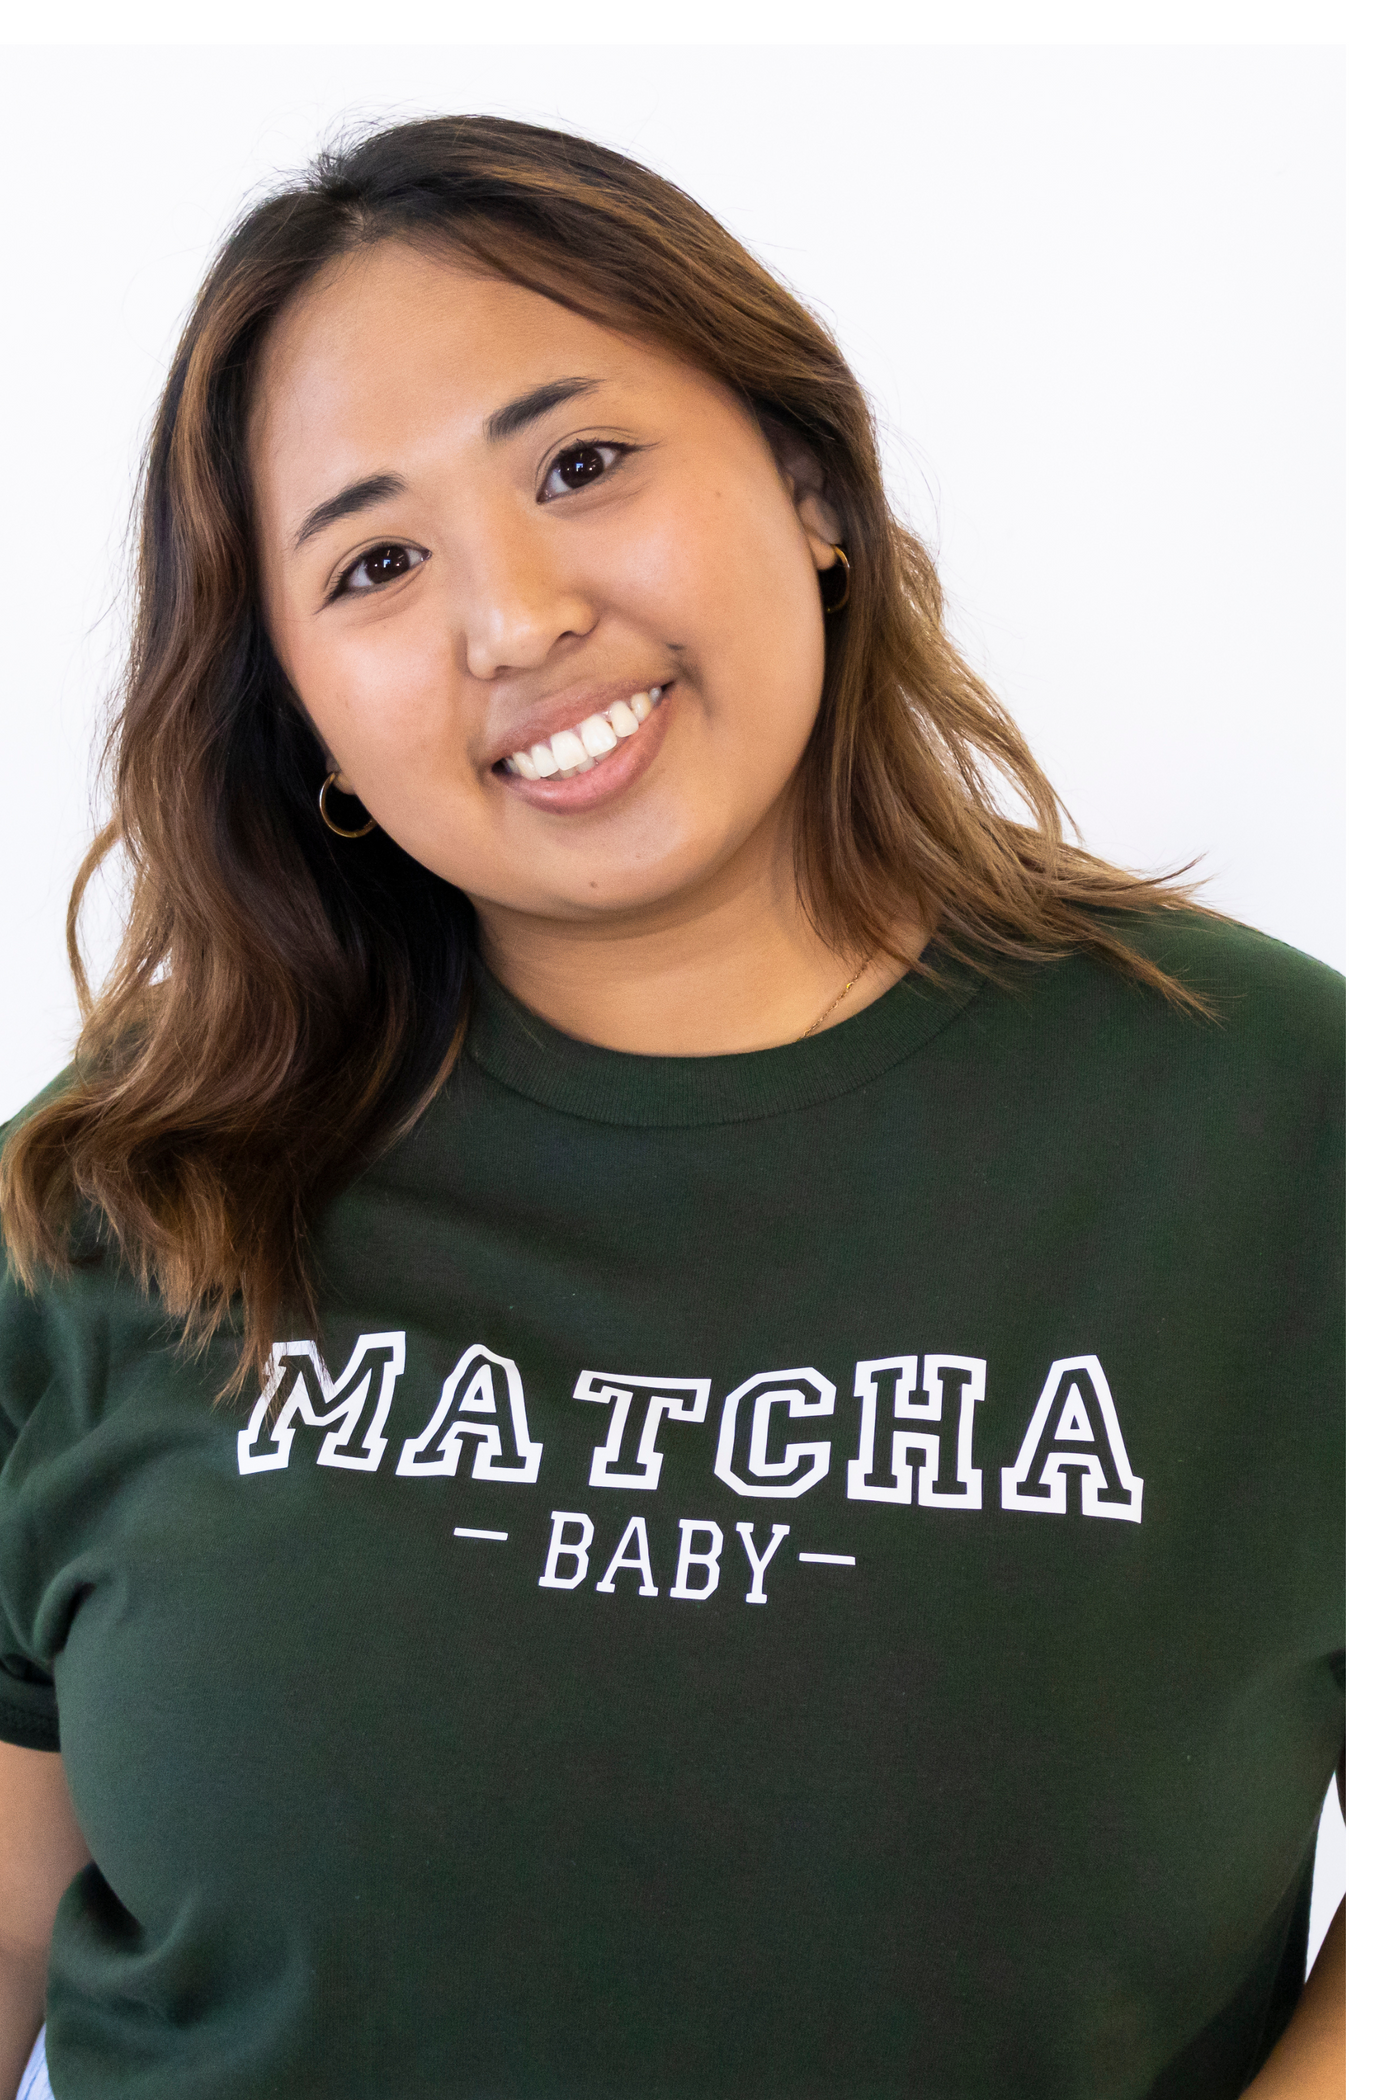 Matcha Lover's Delight: Premium Matcha baby T-shirt - A Perfect Gift for Matcha Tea Enthusiasts